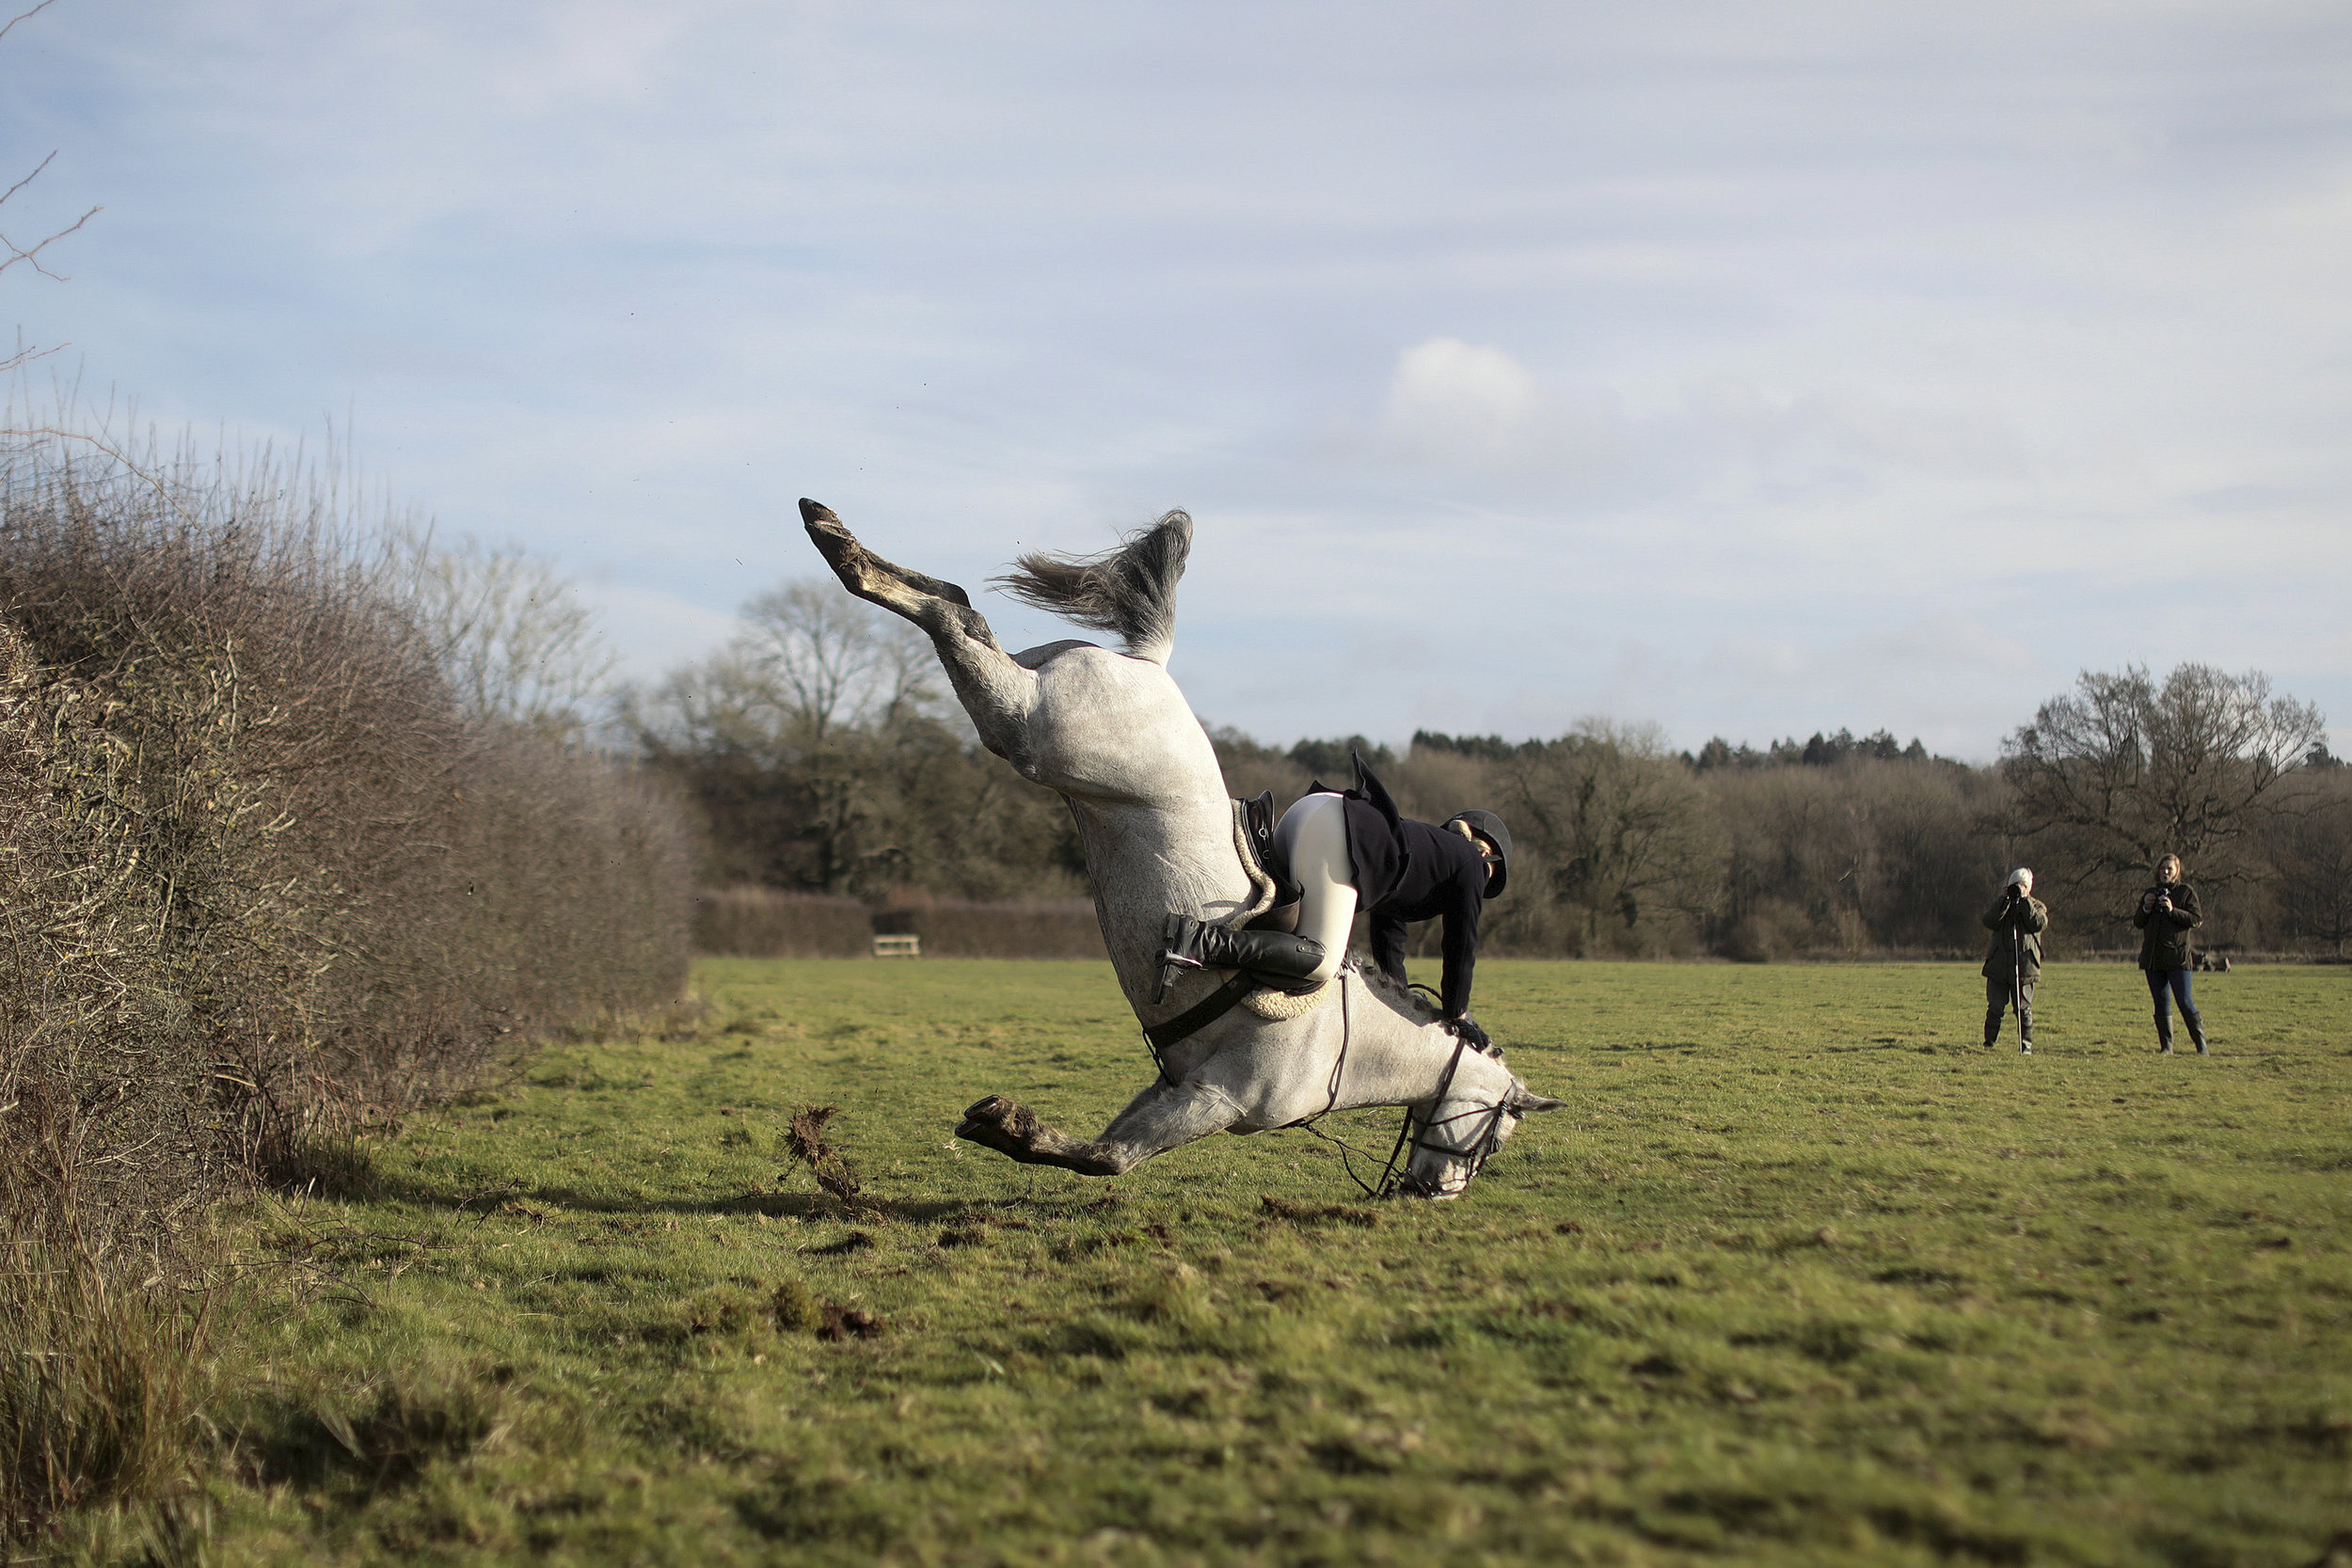  A member of the Old Surrey Burstow and West Kent Hunt crashes as she jumps a fence during the annual Boxing Day hunt in Chiddingstone.
Photo by Simon Dawson, 26 December 2017
 